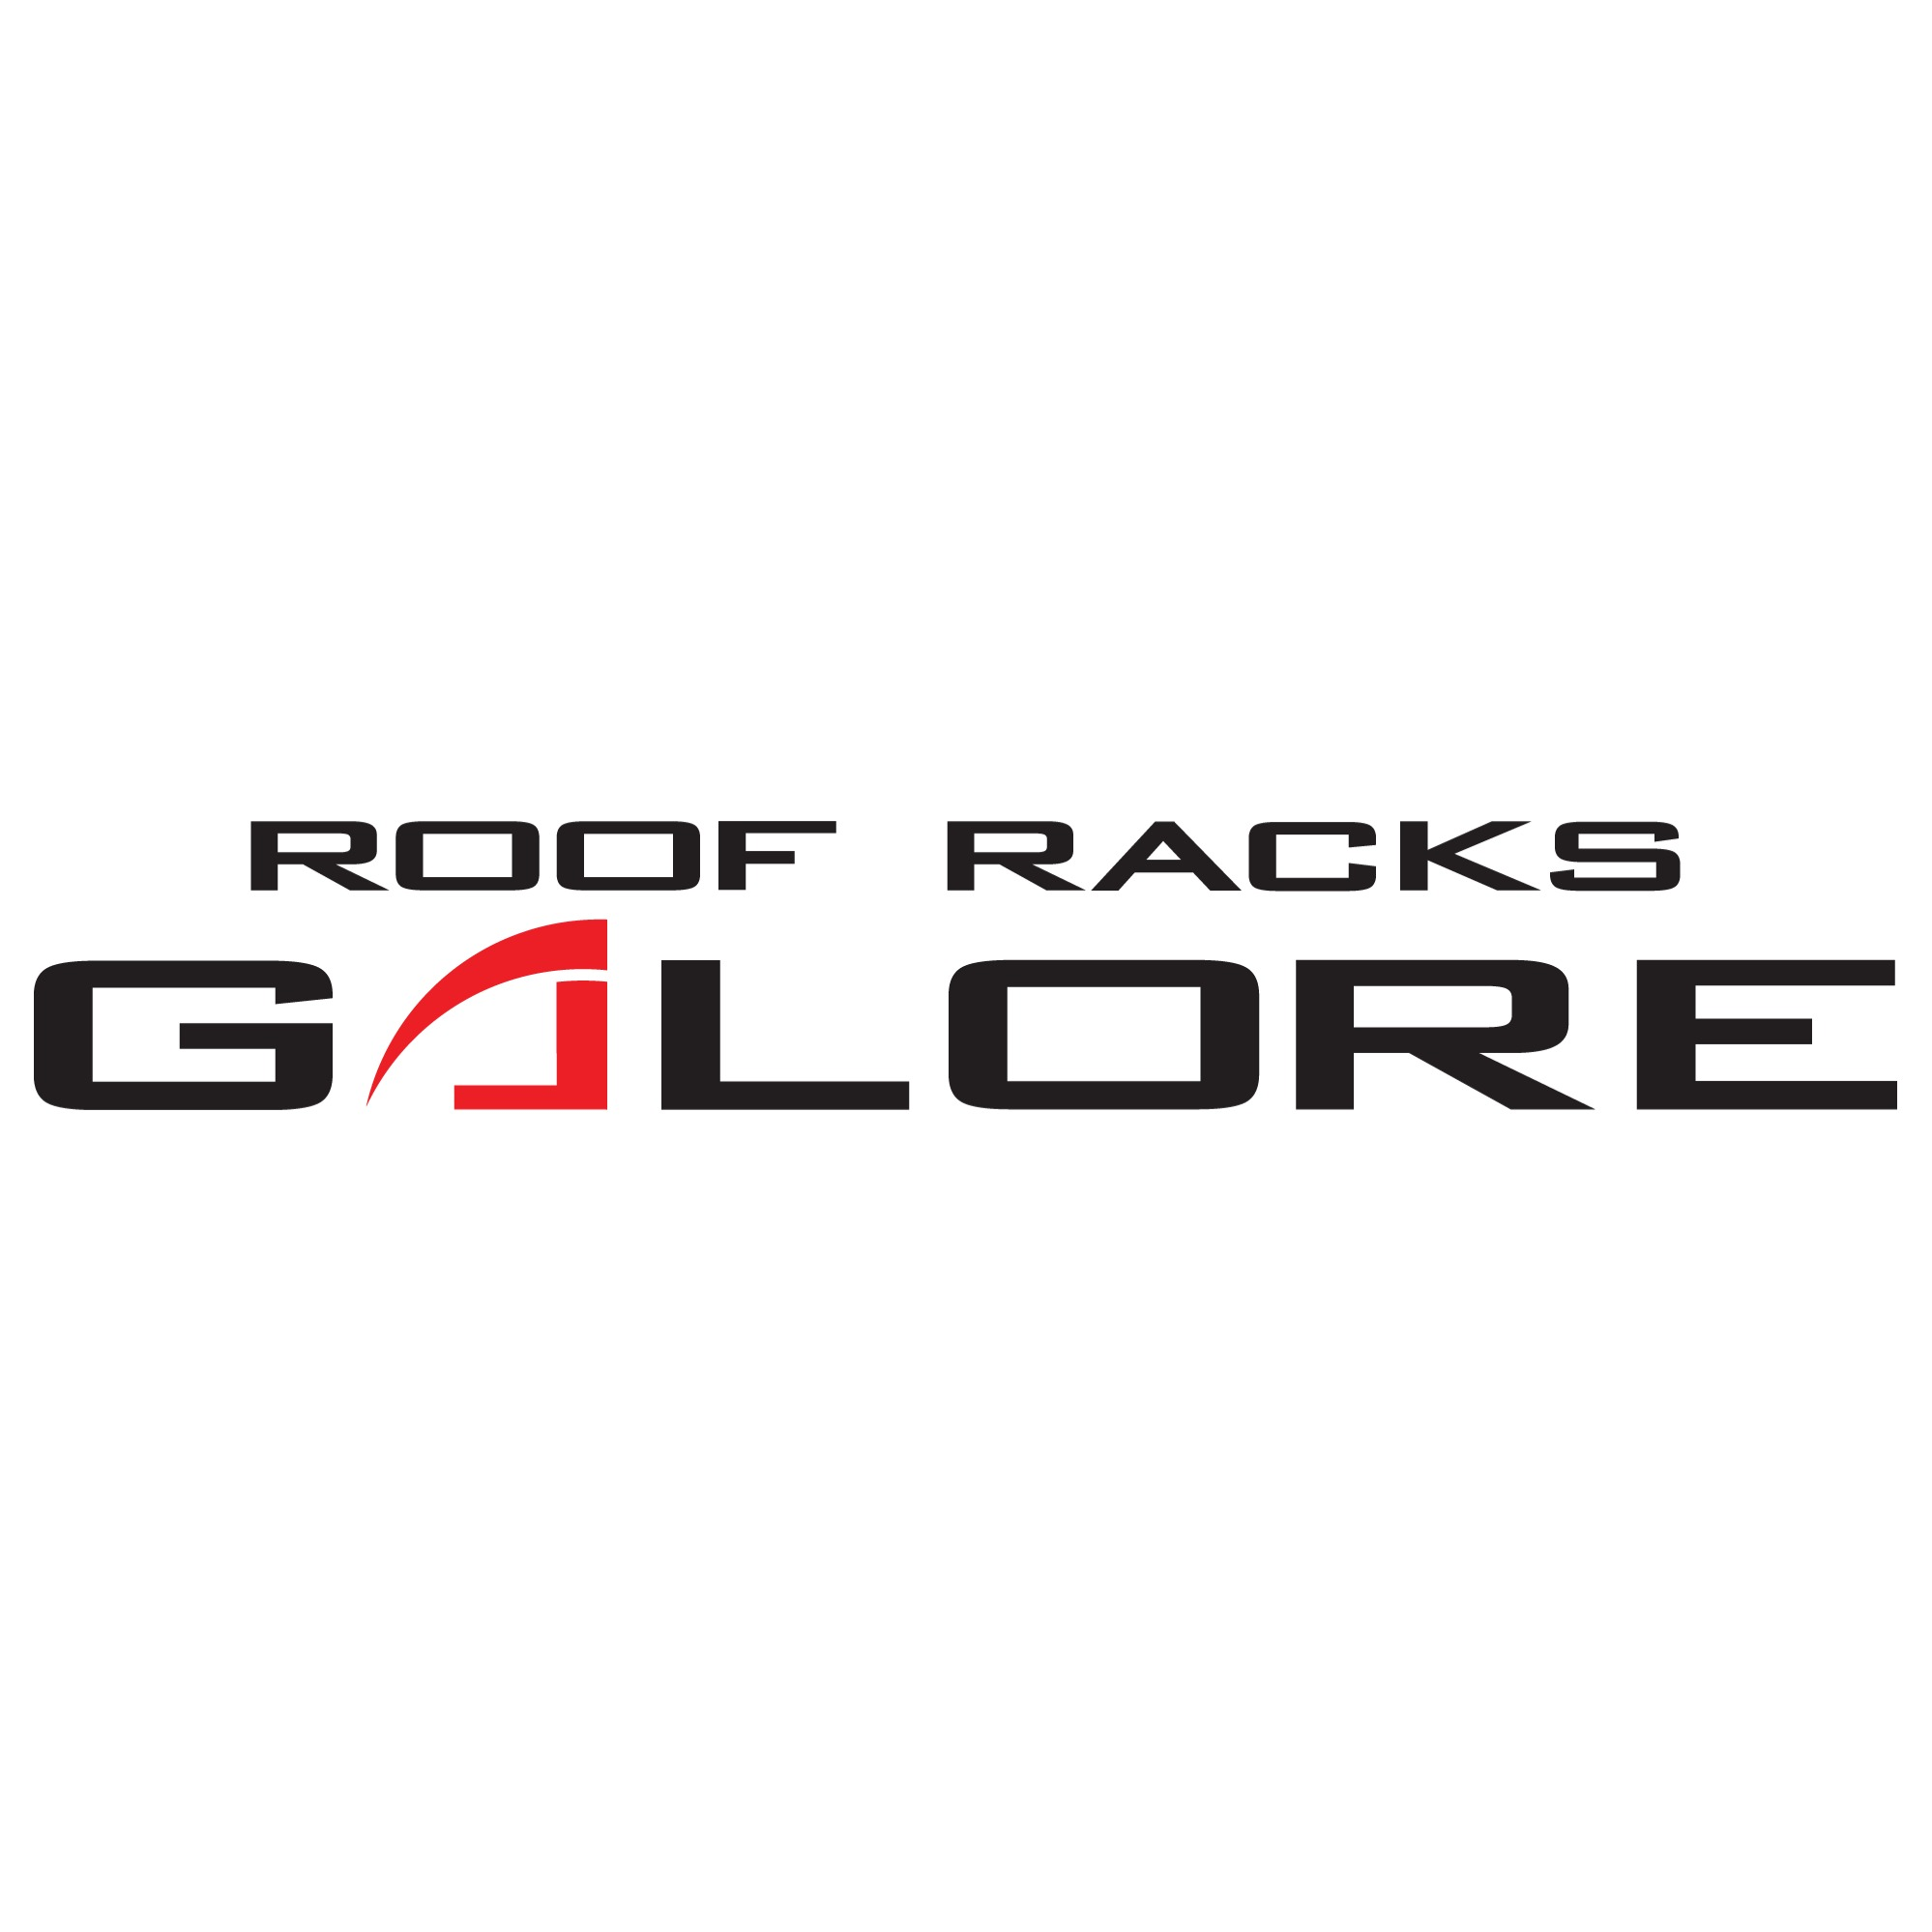 Roof Racks Galore, North Lakes Superstore - North Lakes, QLD 4509 - (07) 3103 8414 | ShowMeLocal.com